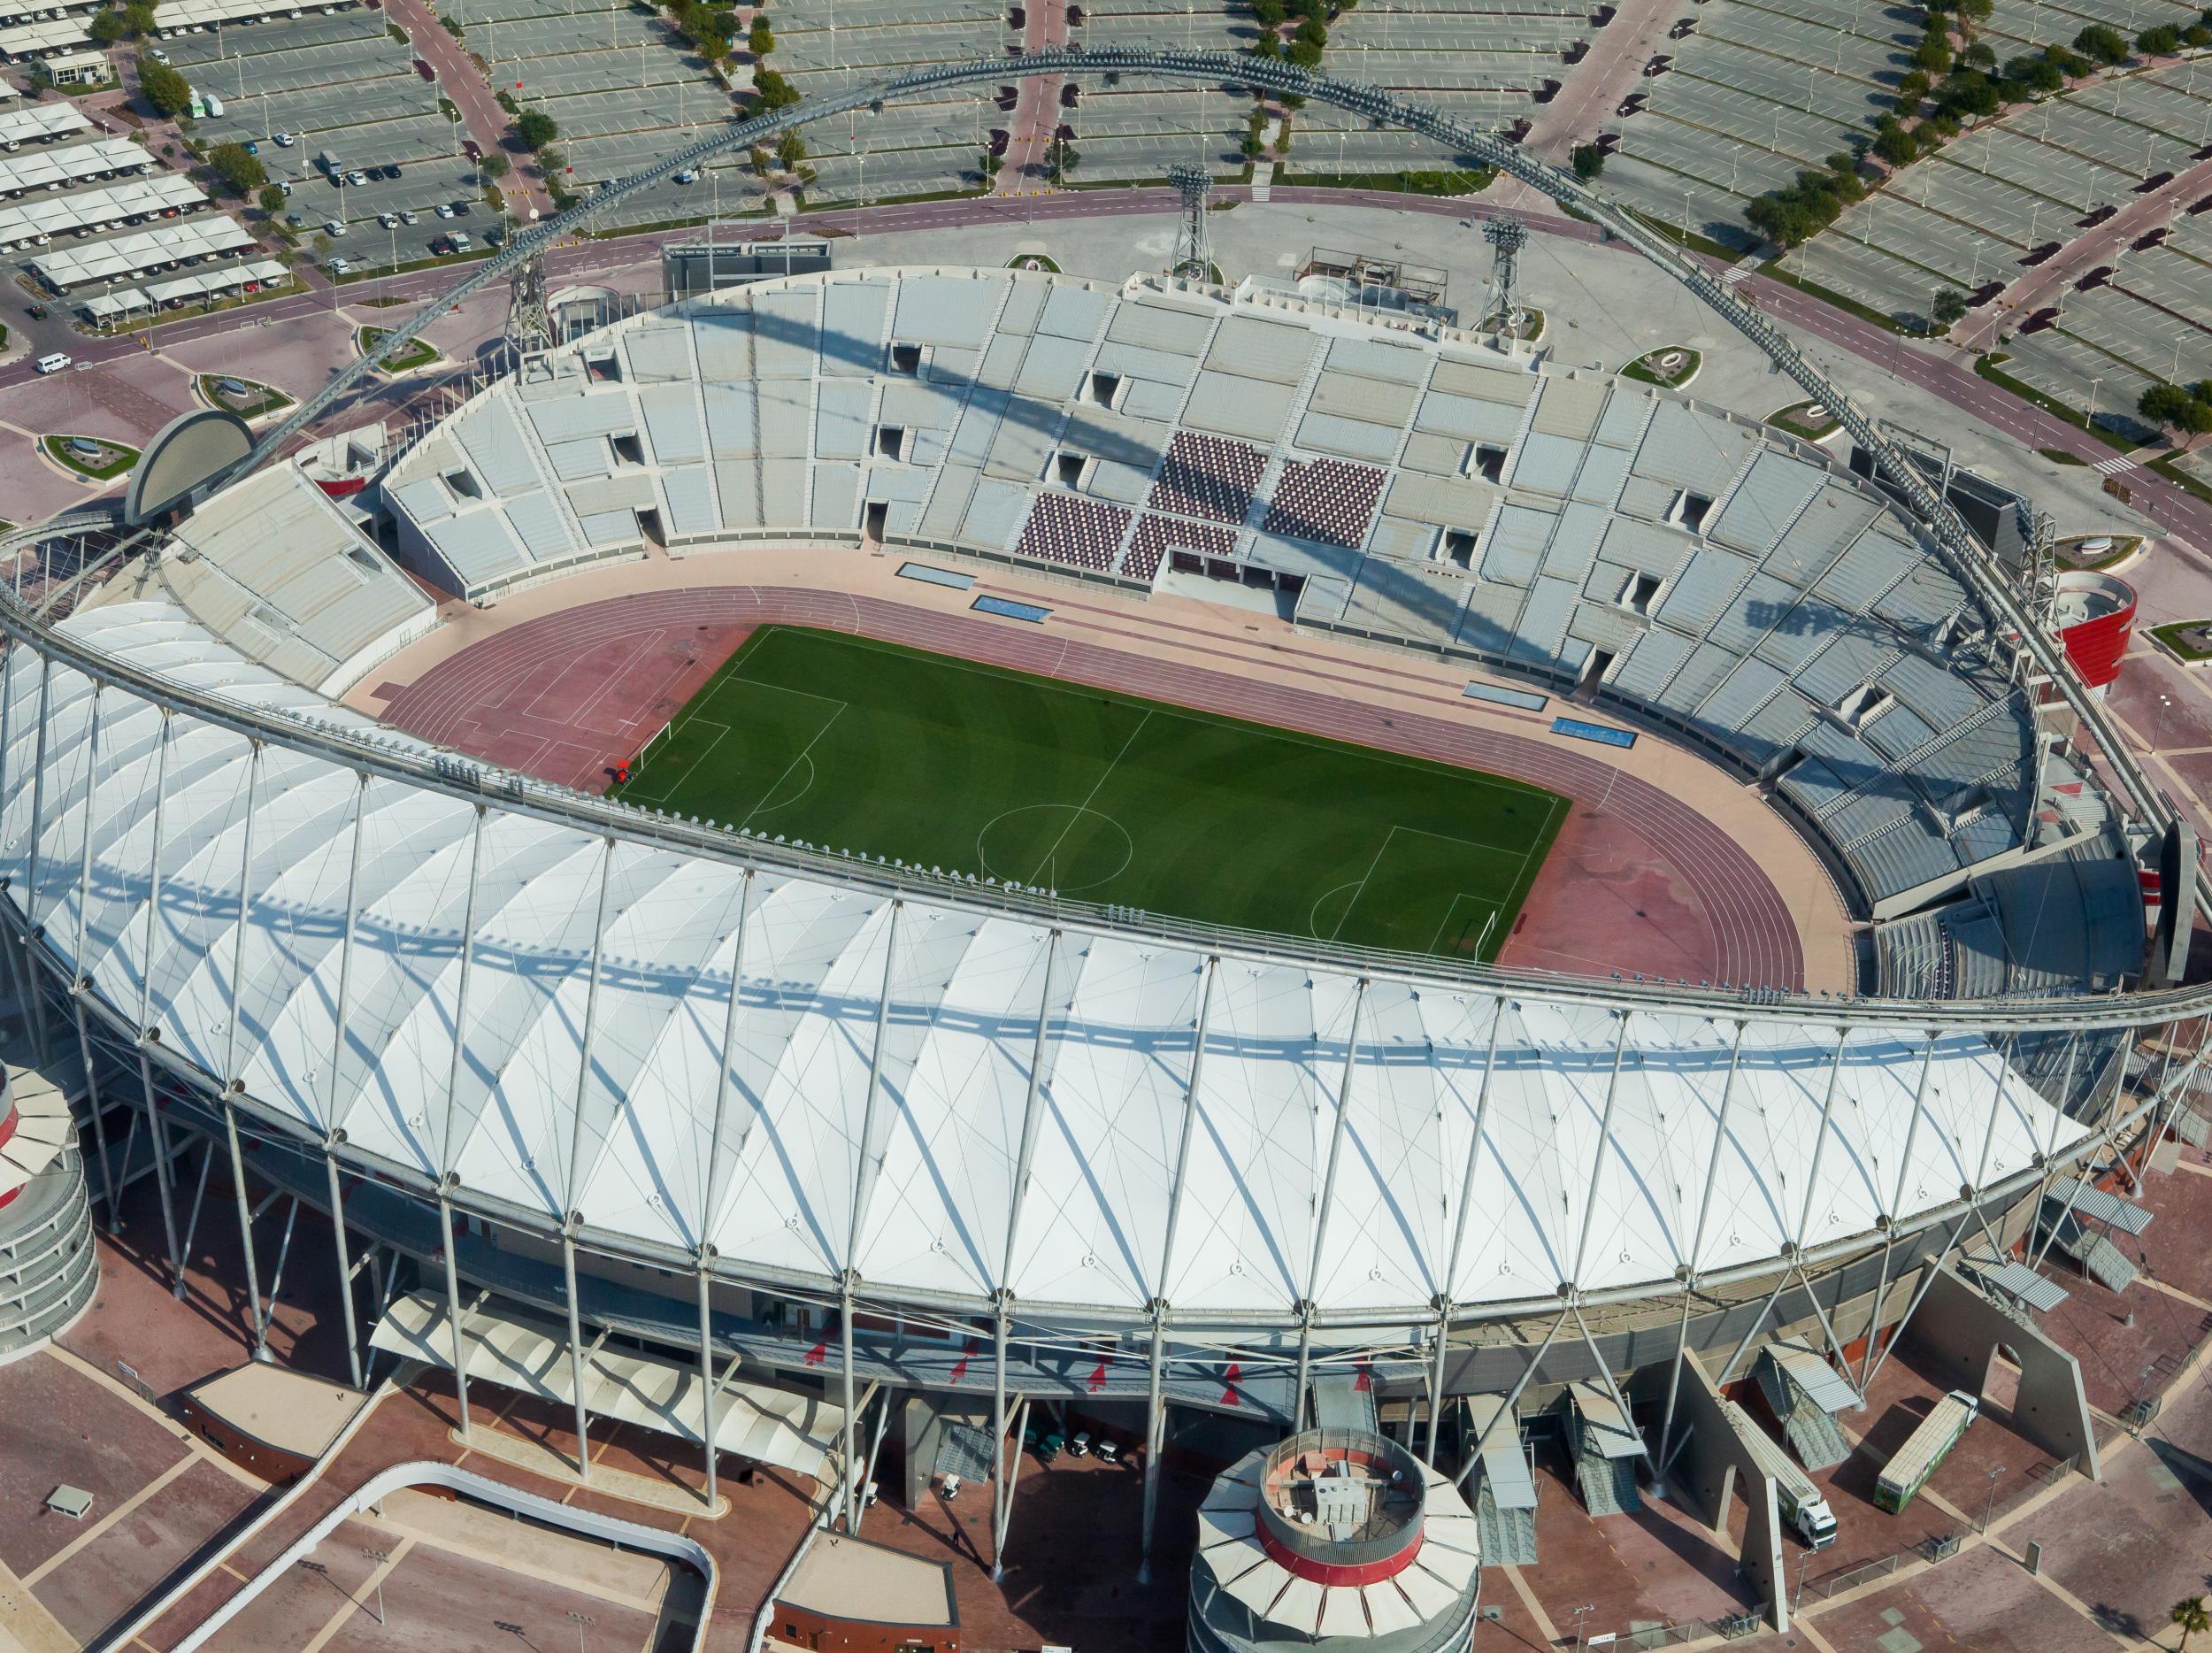 There are plans to expand the 2022 World Cup in Qatar